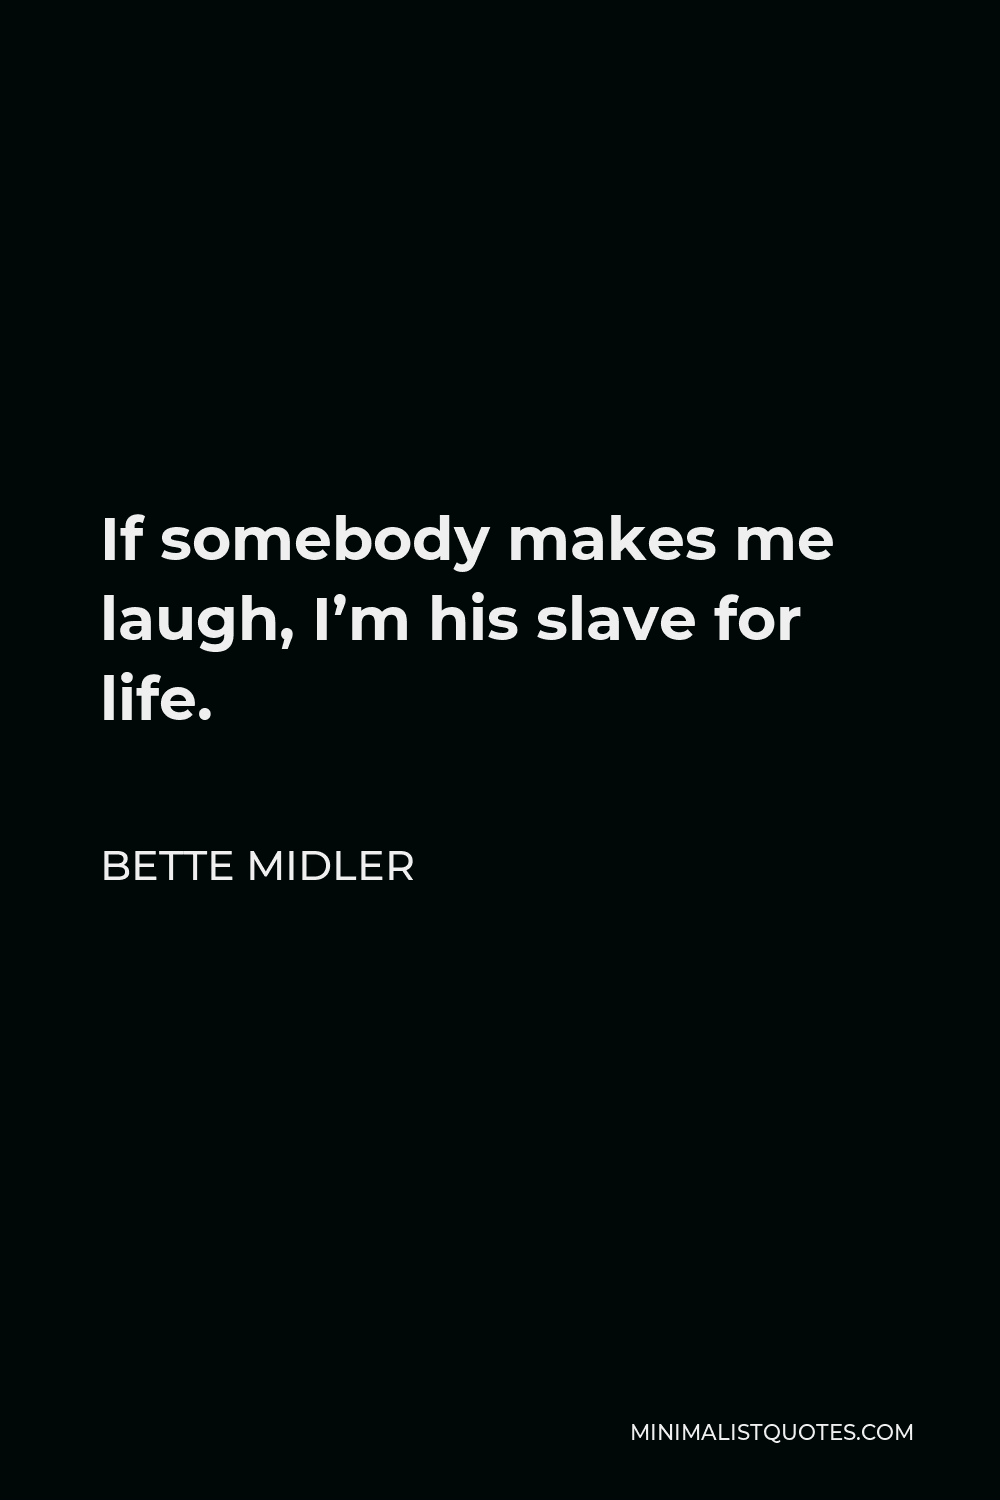 Bette Midler Quote - If somebody makes me laugh, I’m his slave for life.